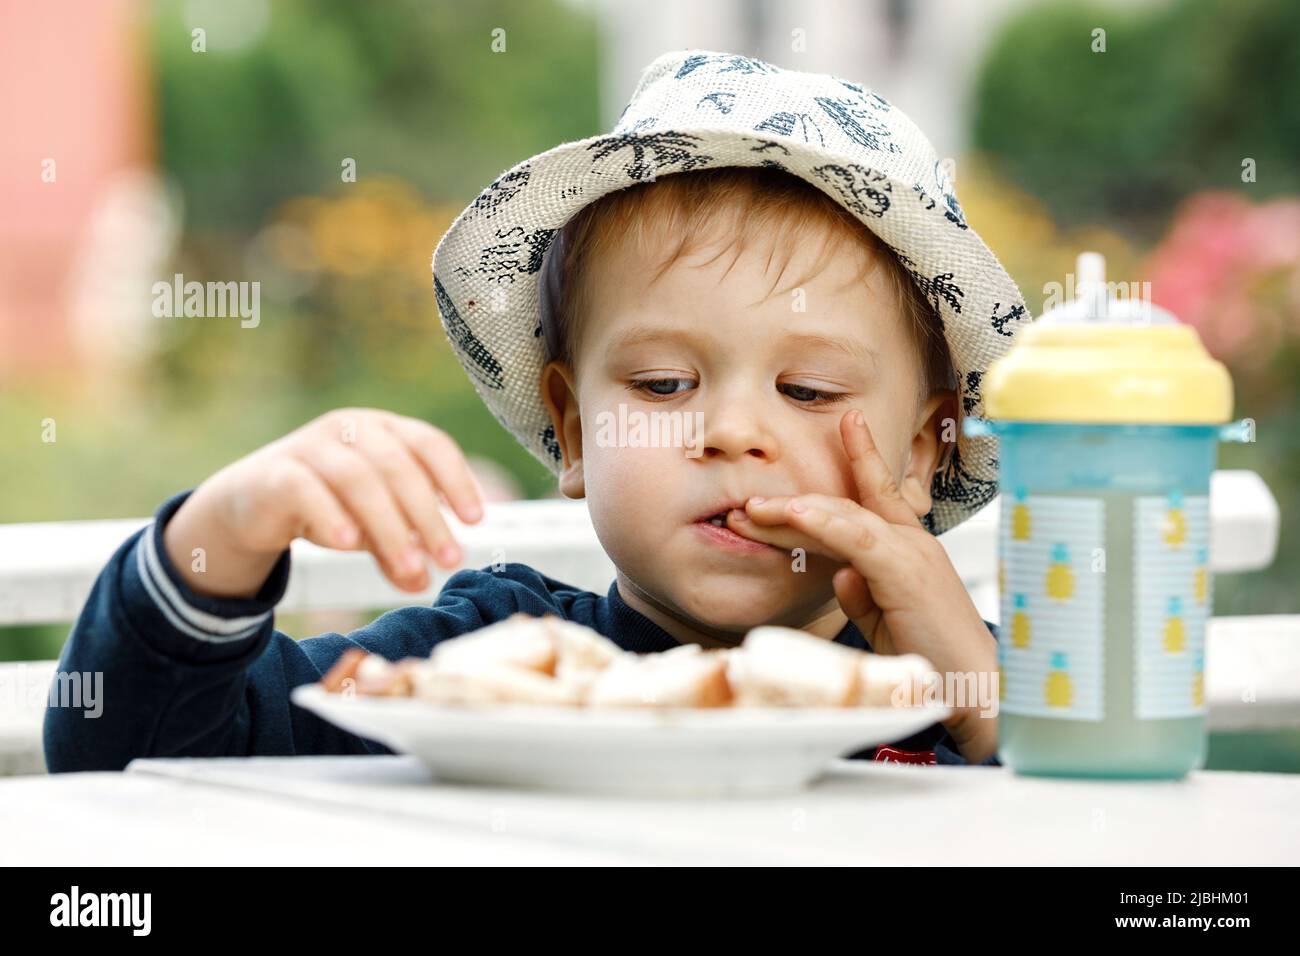 A little boy in a white hat tastes bread with cheese while licking his fingers. A plastic cup with pineapple juice on the table. Stock Photo